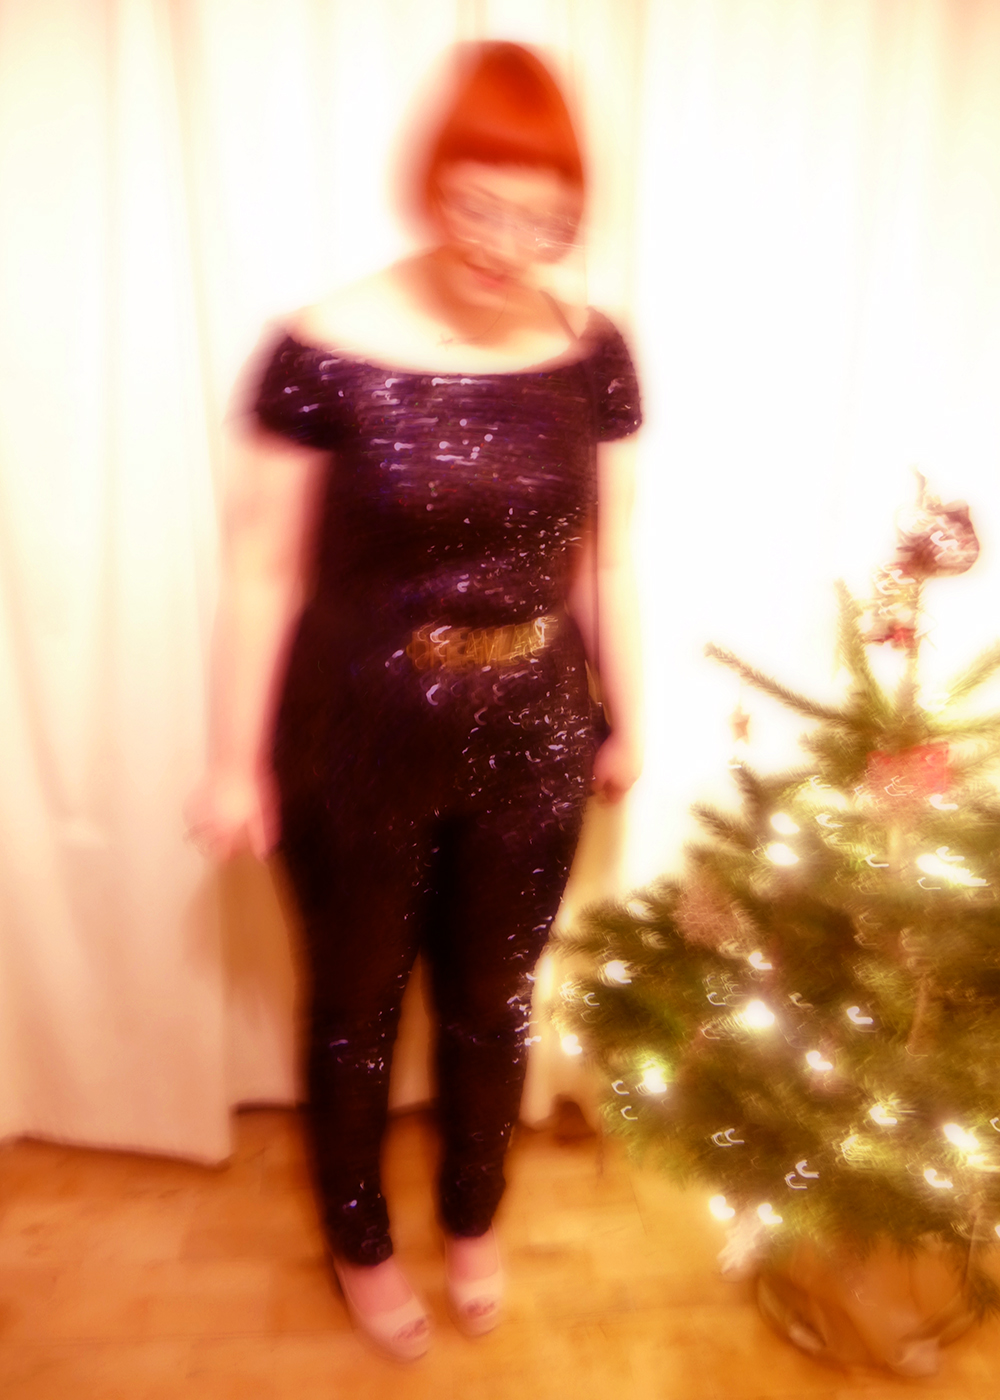 What Helen Wore, Styled by Helen, New Year's eve outfit, hogmanay style, NYE style, 2016, sequin jumpsuit, French Connection, TK Maxx, Dreamland belt, party outfit, party style, sequin style, Little black dress alternative, festive party style, tatty devine kiss necklace, new look platform shoes, 70s sequin style, red head, scottish blogger, blogging duo, ginger bob, Iolla glasses, #seewithiolla, clear glasses